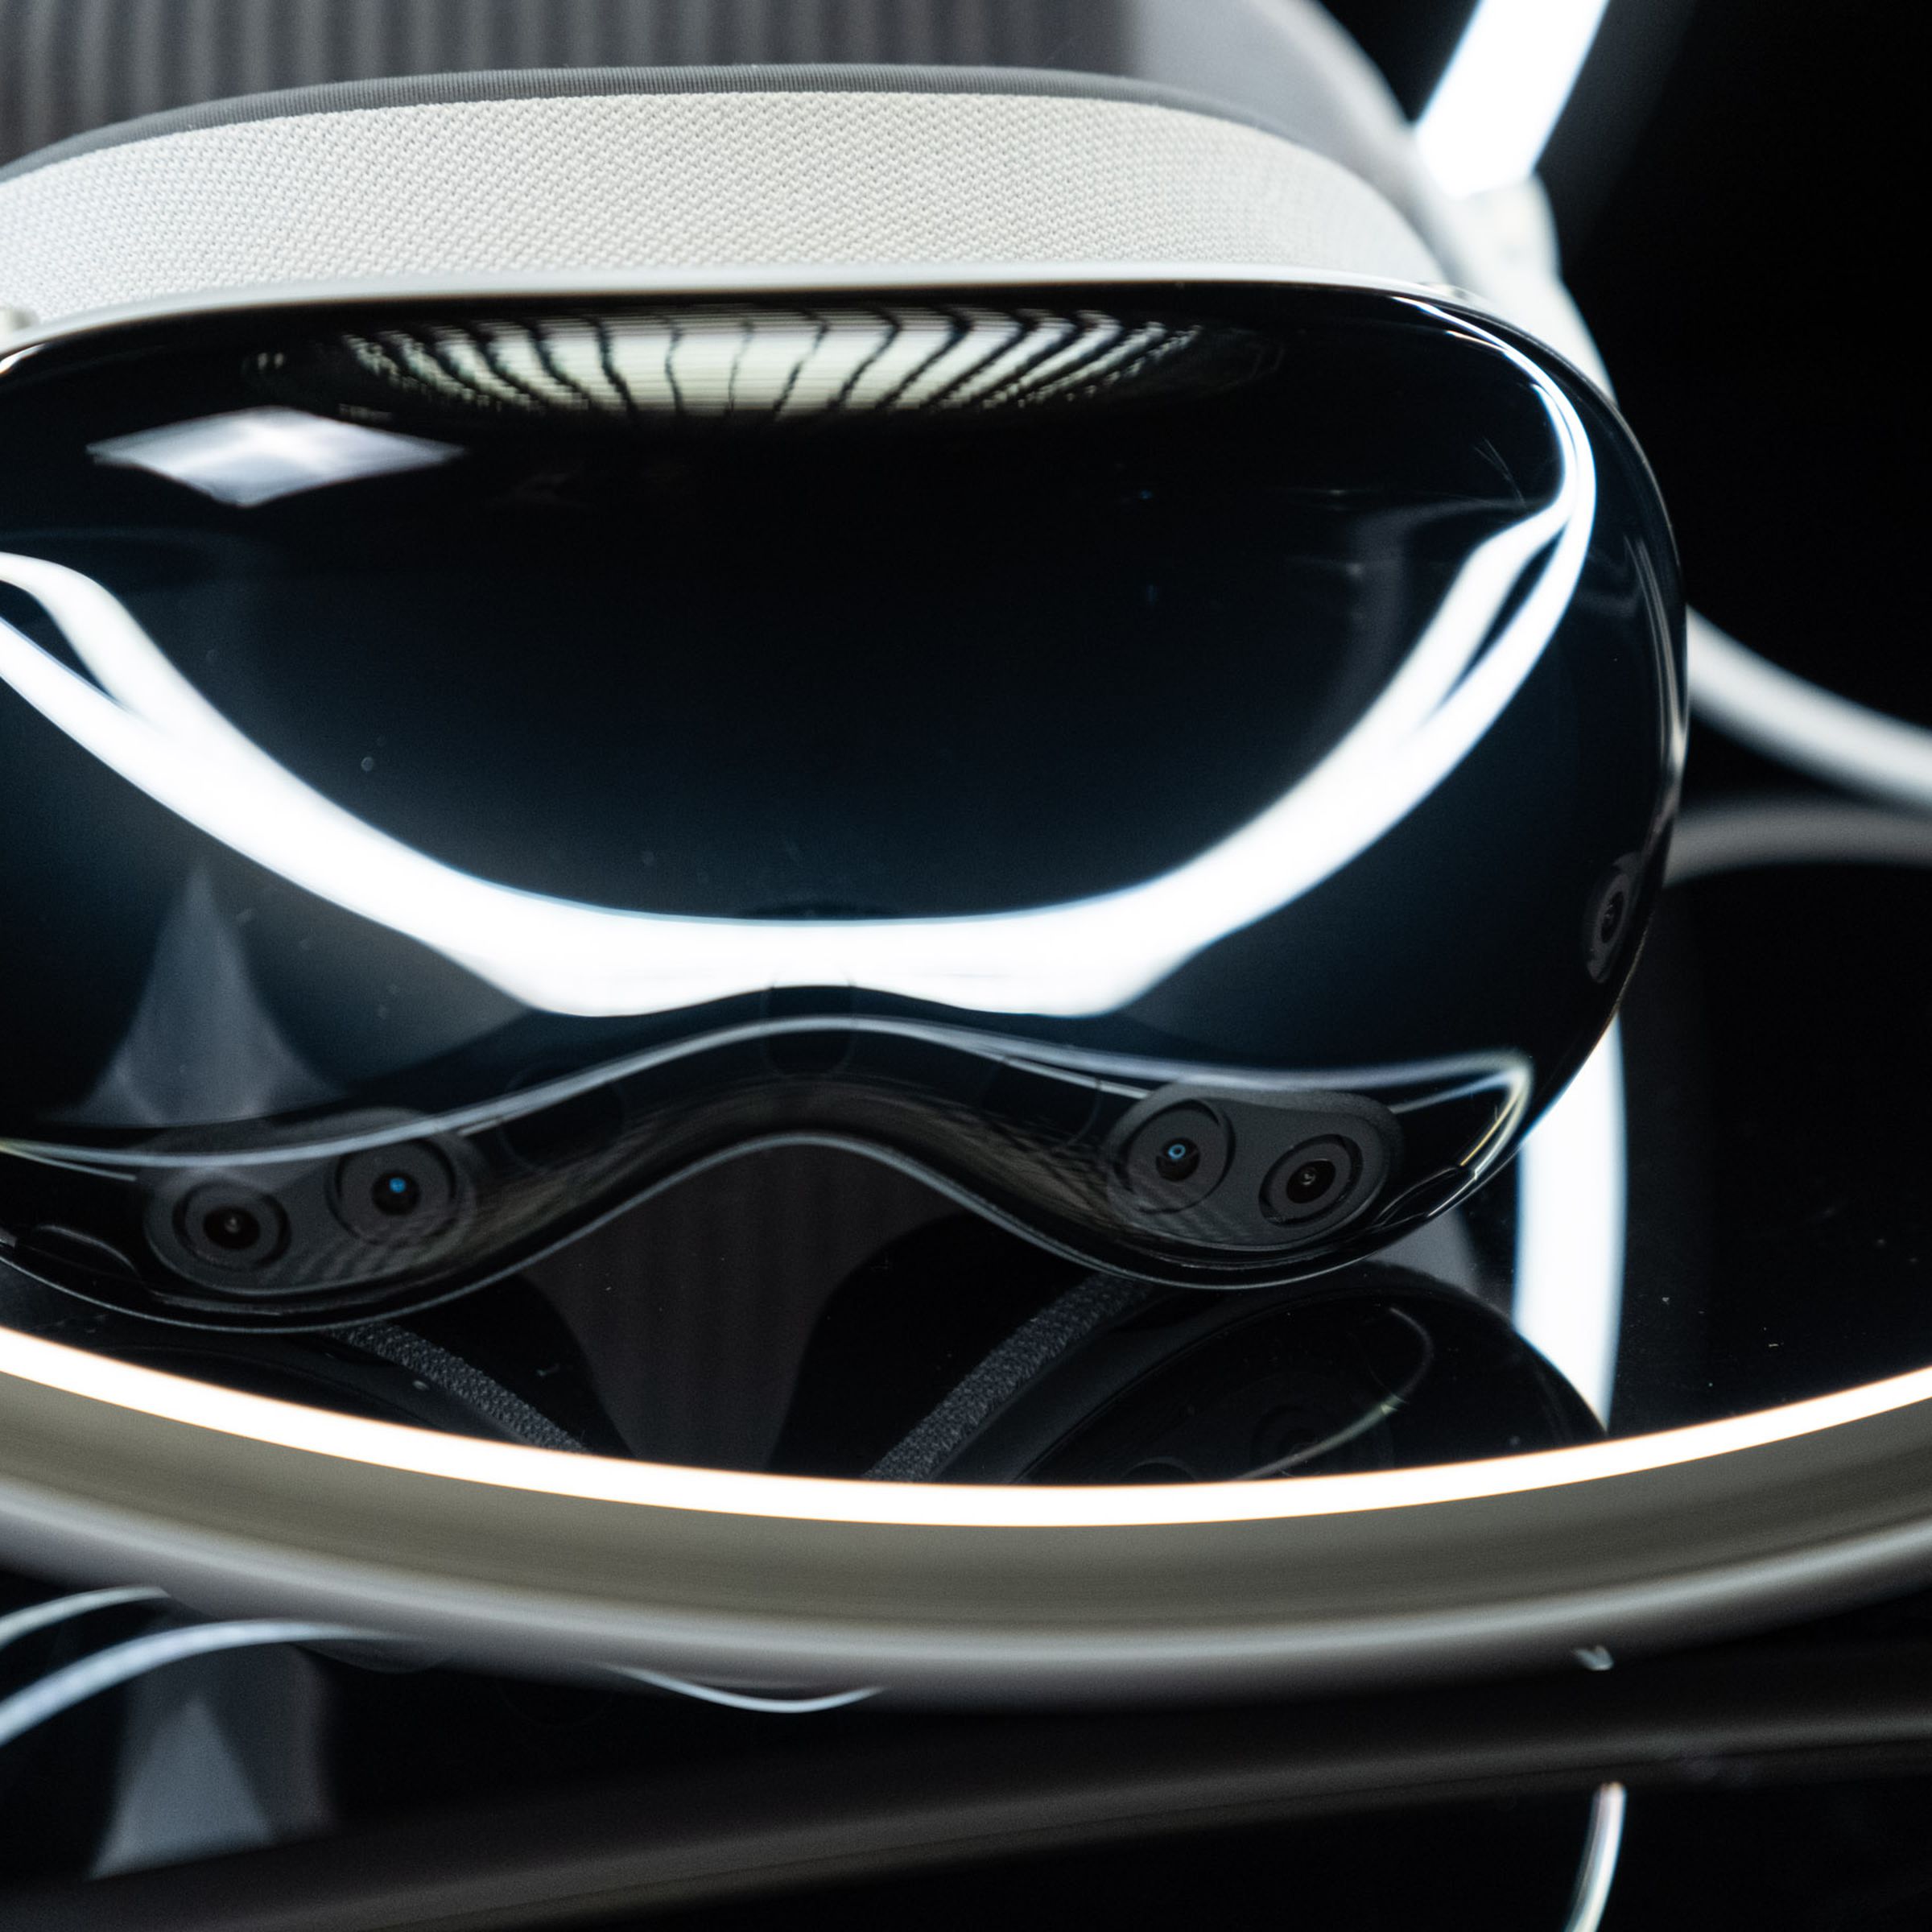 The Vision Pro headset, photographed so that you can see the cameras on the front.